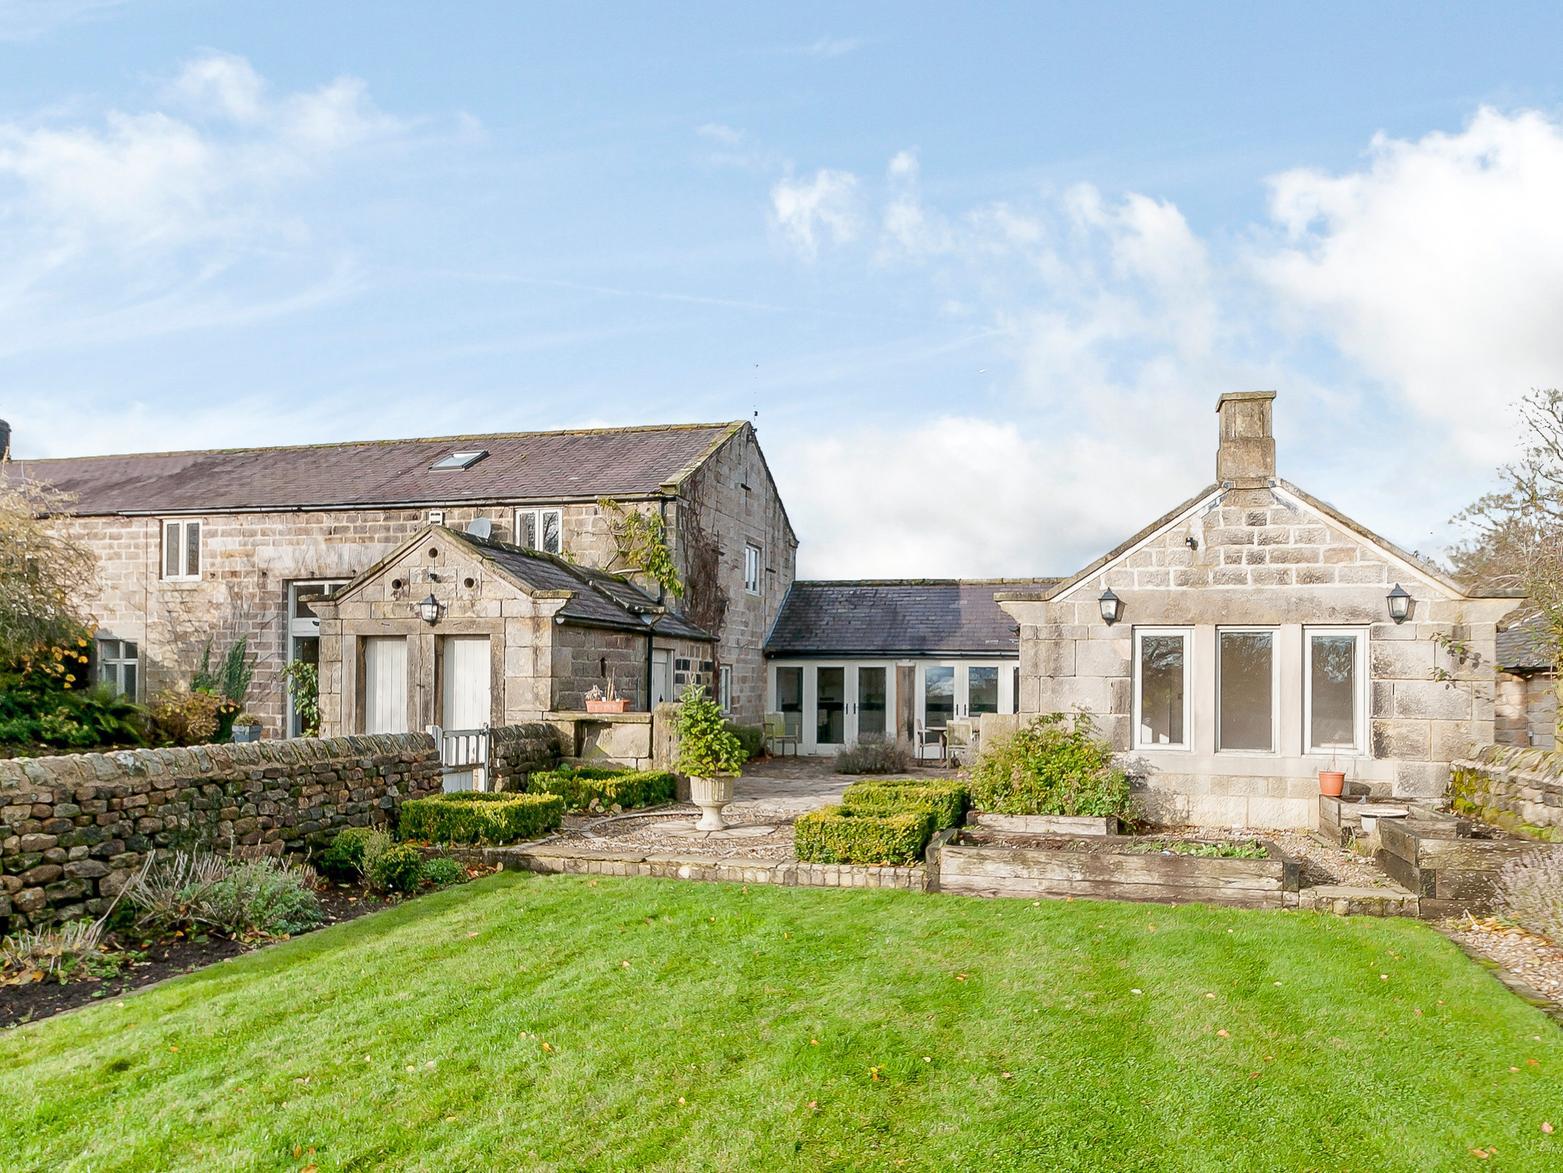 A superb barn conversion providing spacious 4/5 bedroom accommodation, set amidst attractive gardens, enjoying excellent views over beautiful Nidderdale countryside.